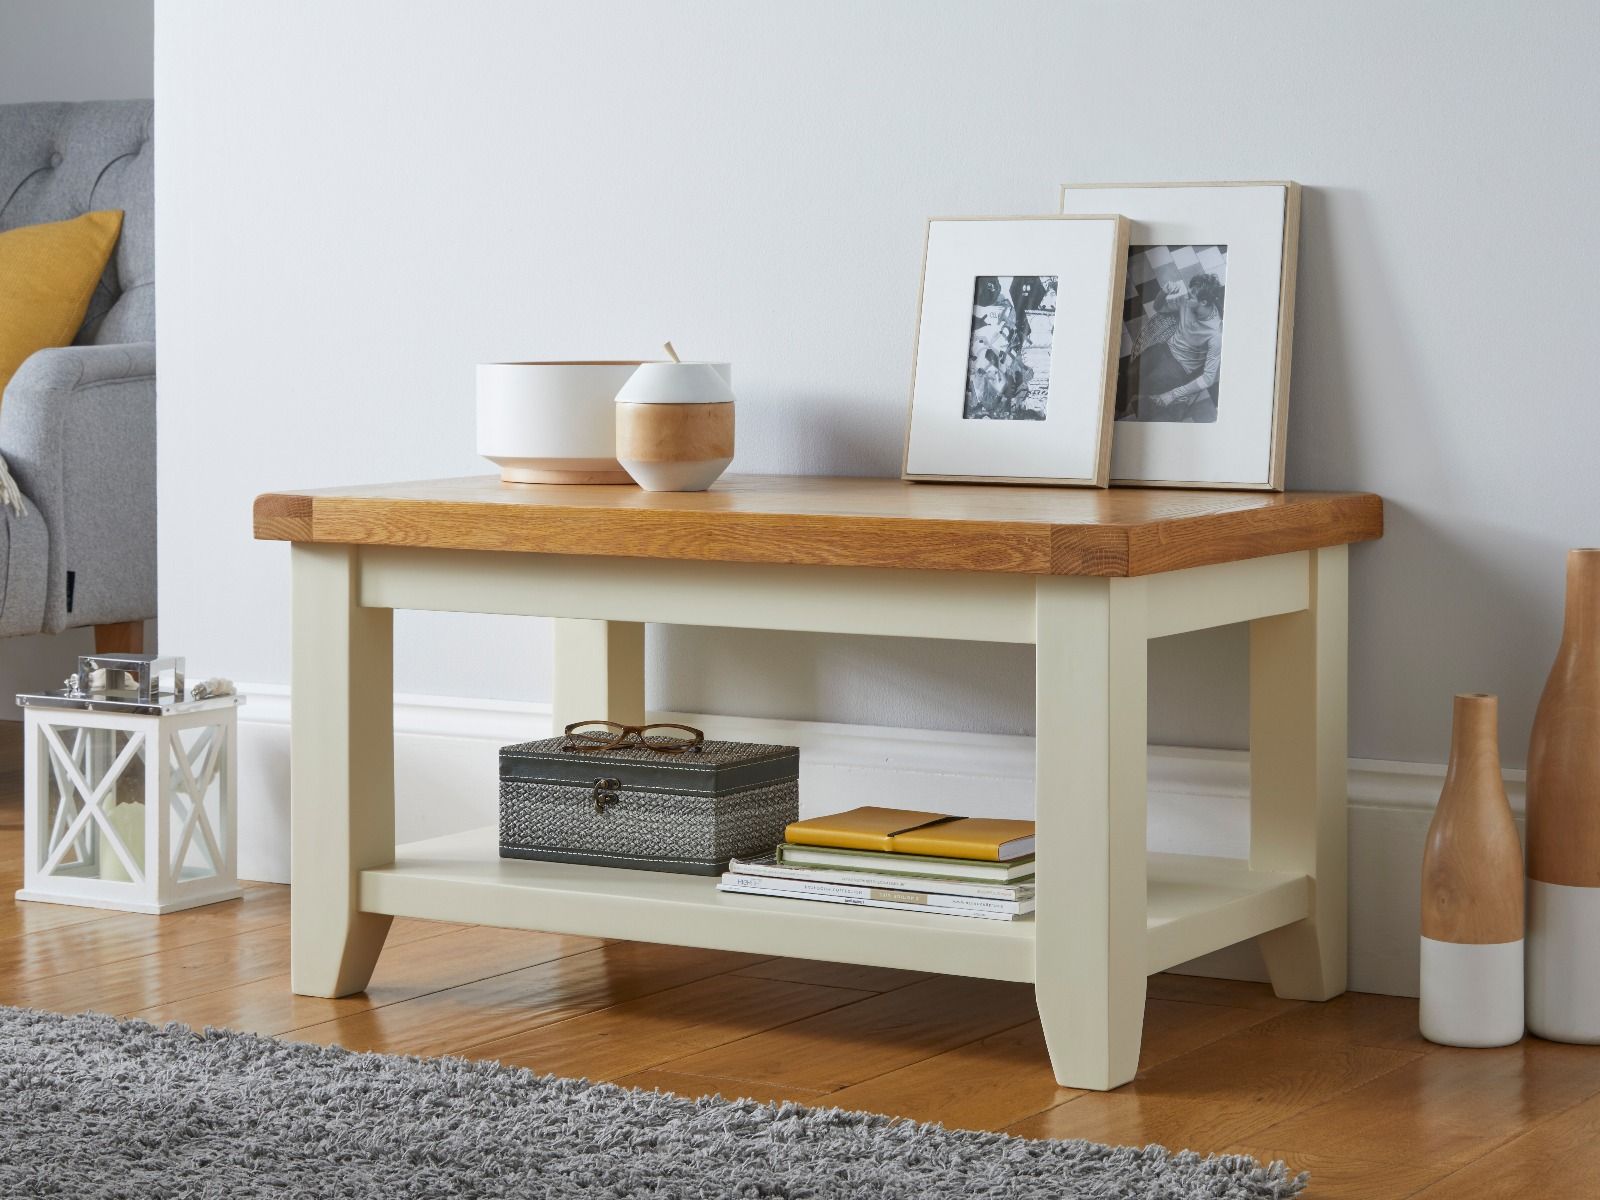 Country Cottage Cream Painted Oak Coffee Table with Shelf - 10% OFF CODE SAVE